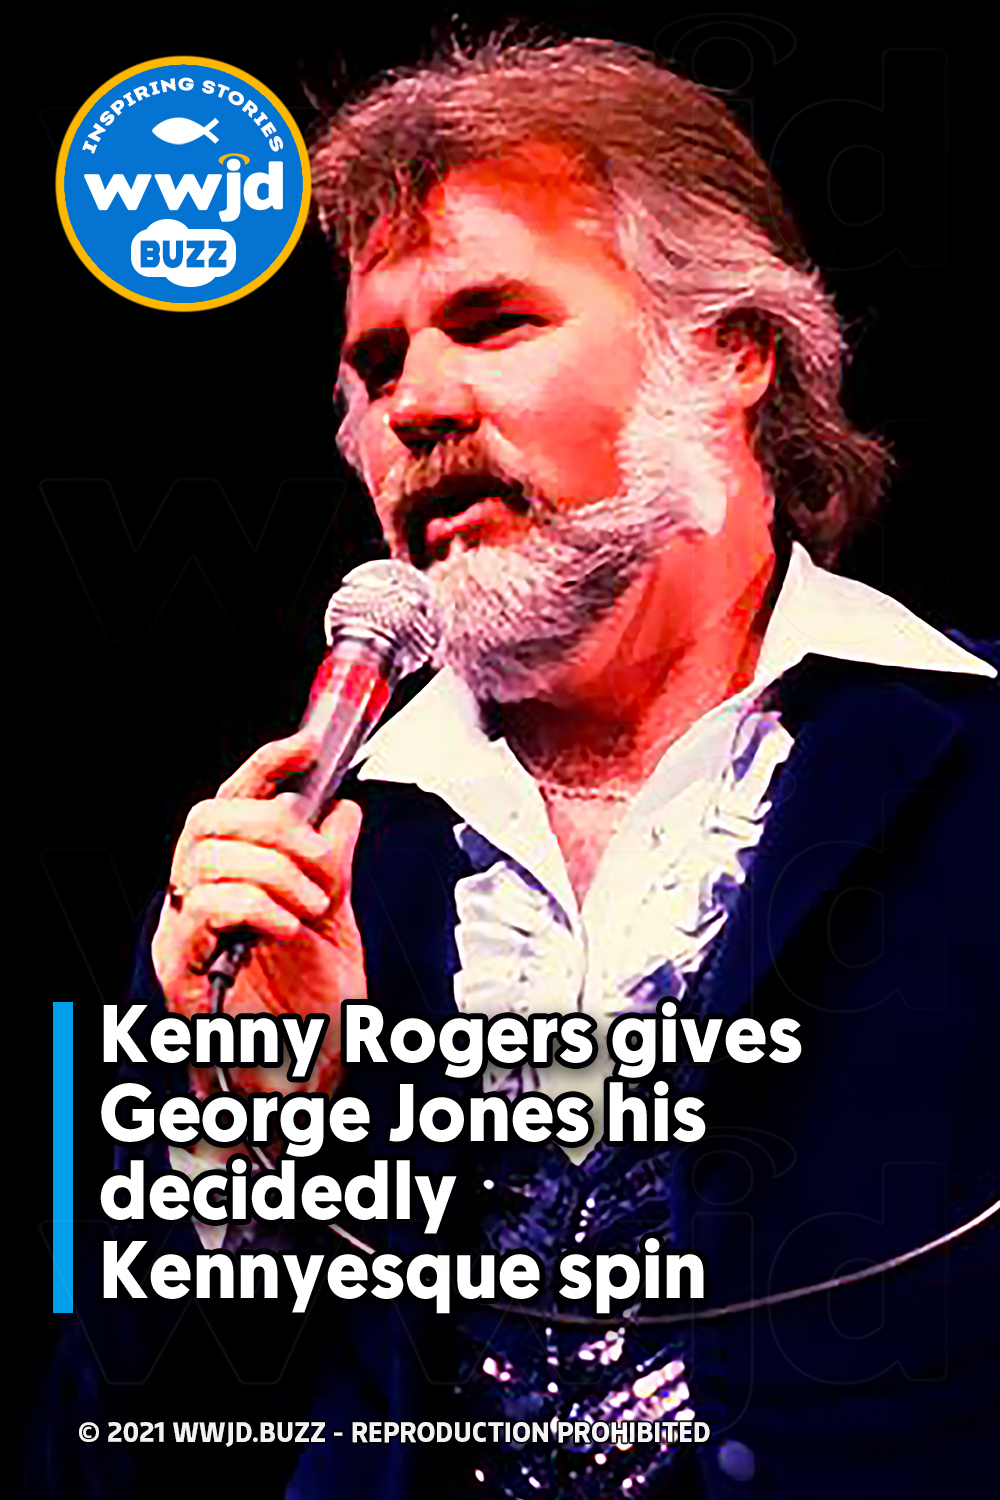 Kenny Rogers gives George Jones his decidedly Kennyesque spin